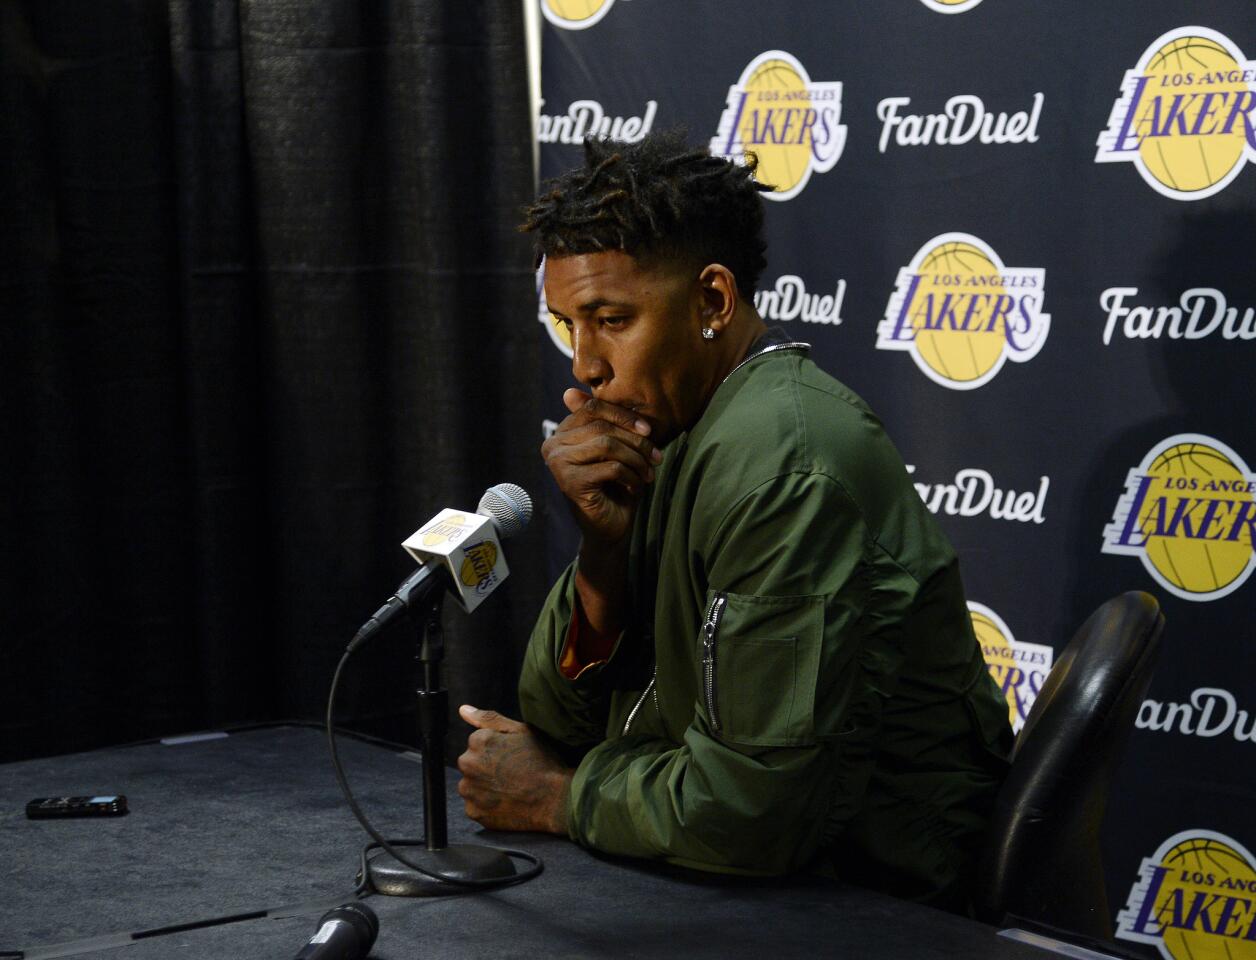 Nick Young appears to be out of it mentally and is out of Lakers' rotation as a result